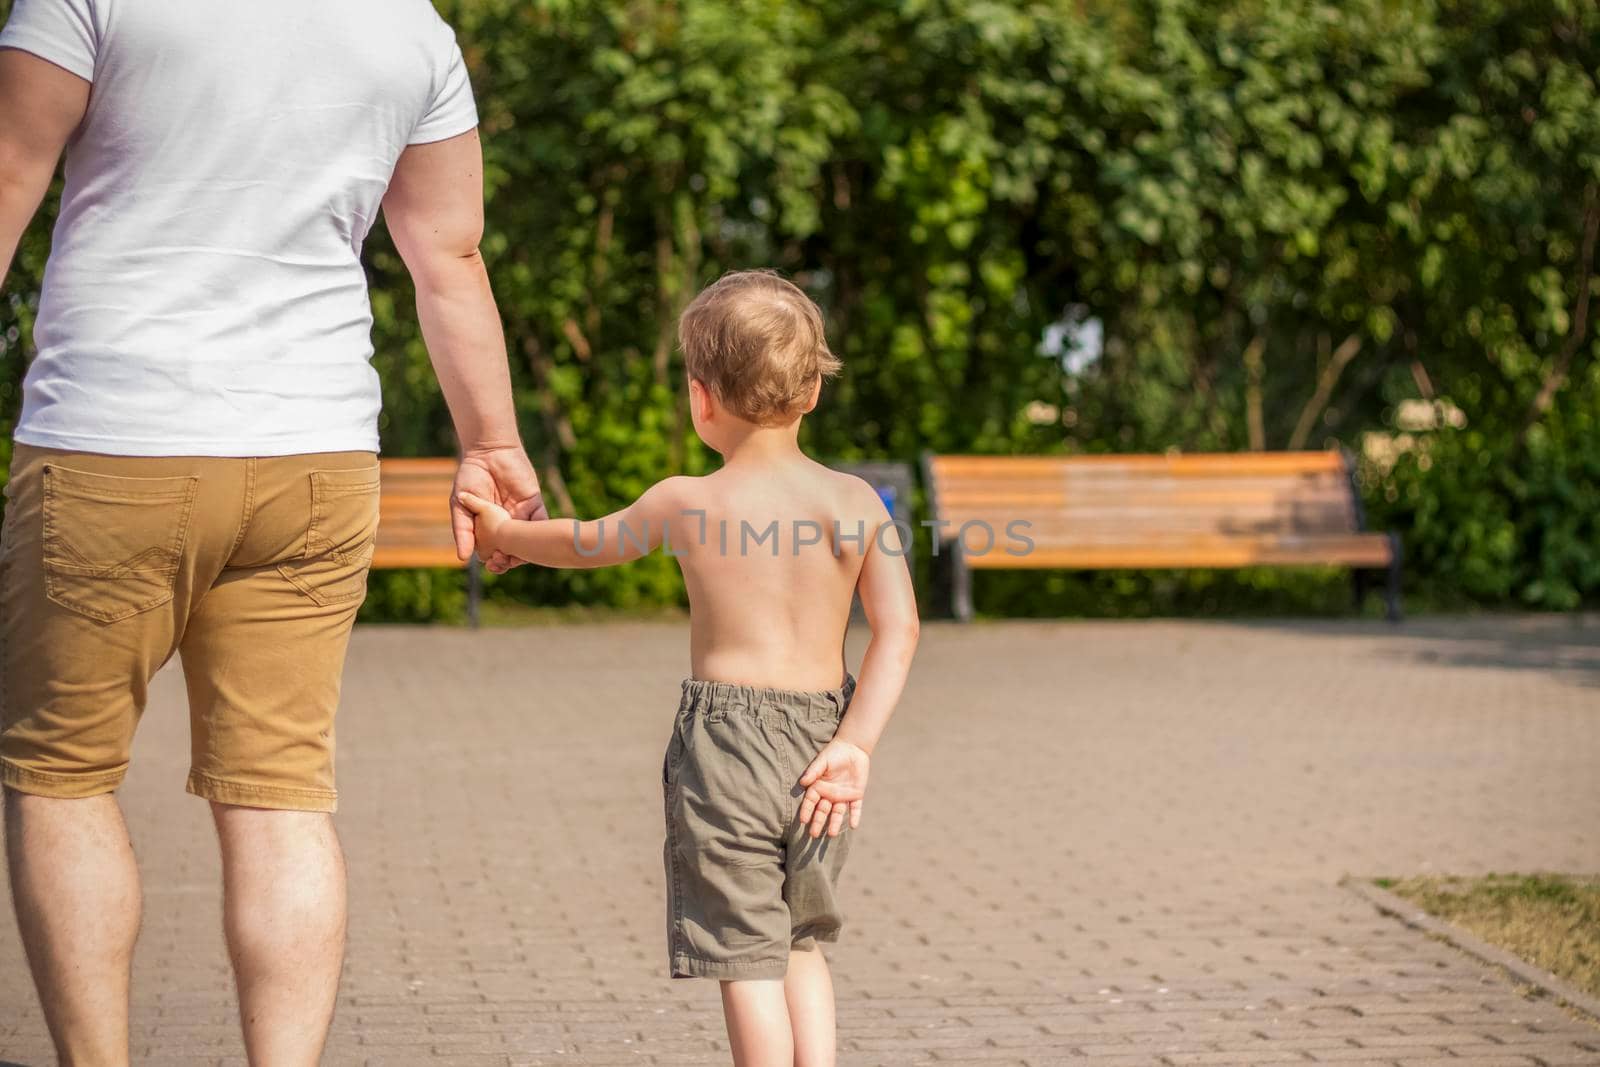 Walking in the park on a summer day by the river and experiencing the joy of walking. summer heat, a child without a T-shirt. Summer